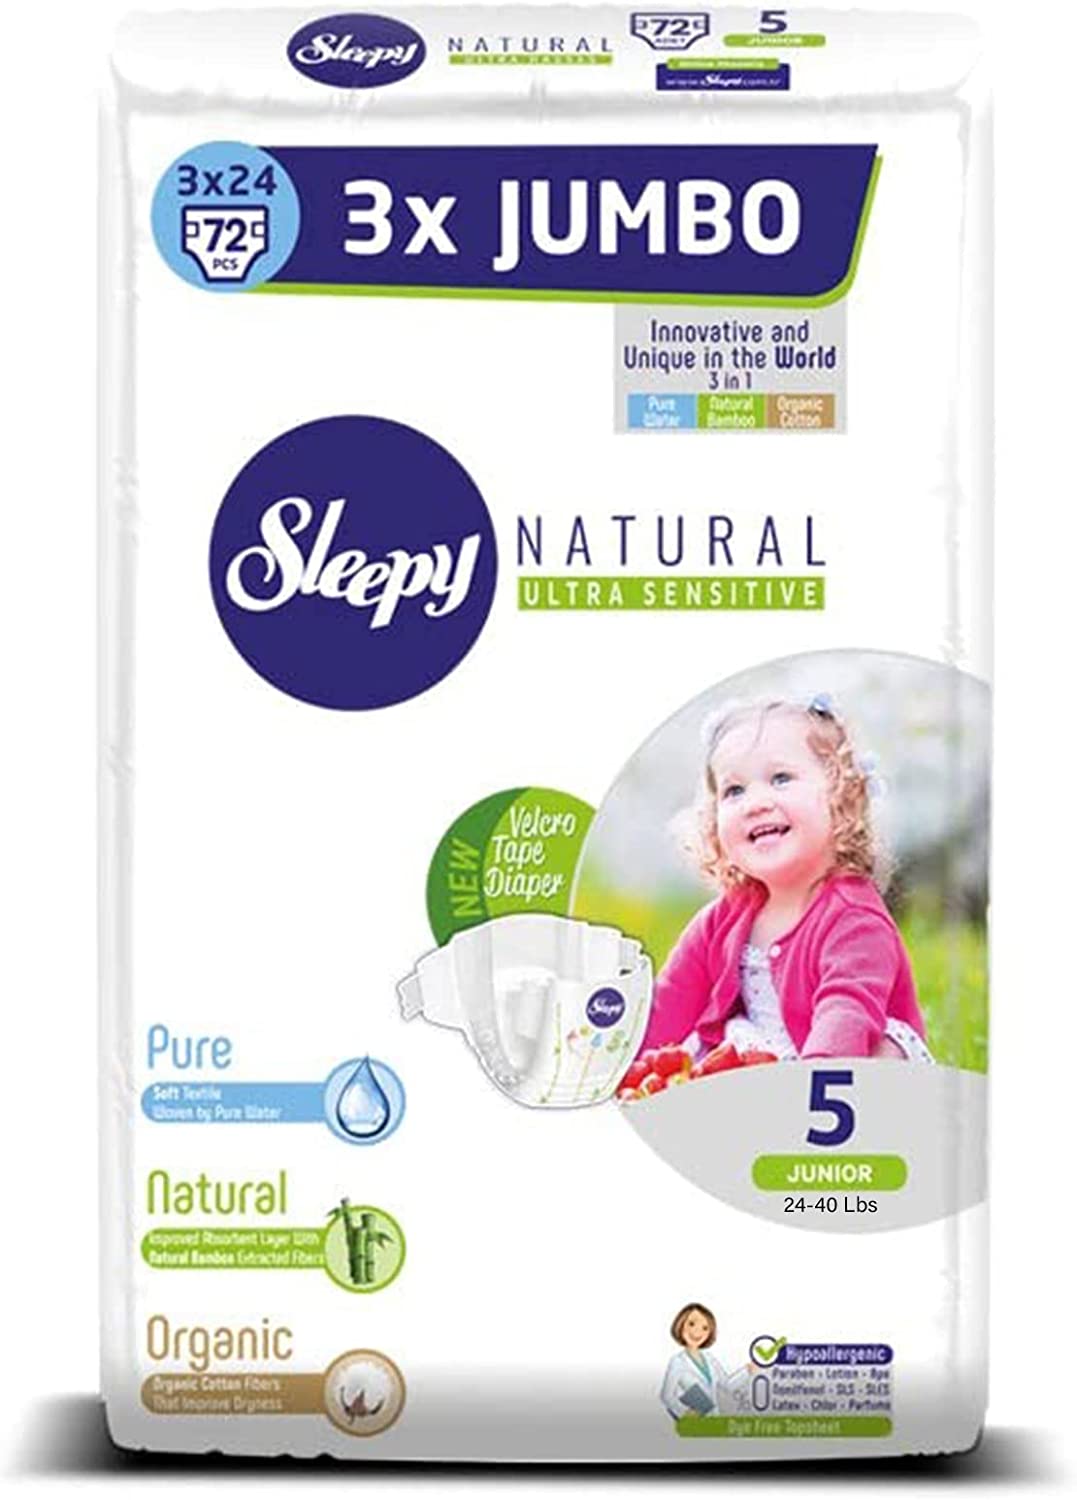 SOHO|Sleepy 3x Jumbo Natural Baby Diapers, Made from Organic Cotton and Bamboo Extract, Ultimate Comfort and Dryness, Diapers 72 Count – Size 5 Junior Diapers, Child Weight 11-18 kgs , (Size 5 Junior)